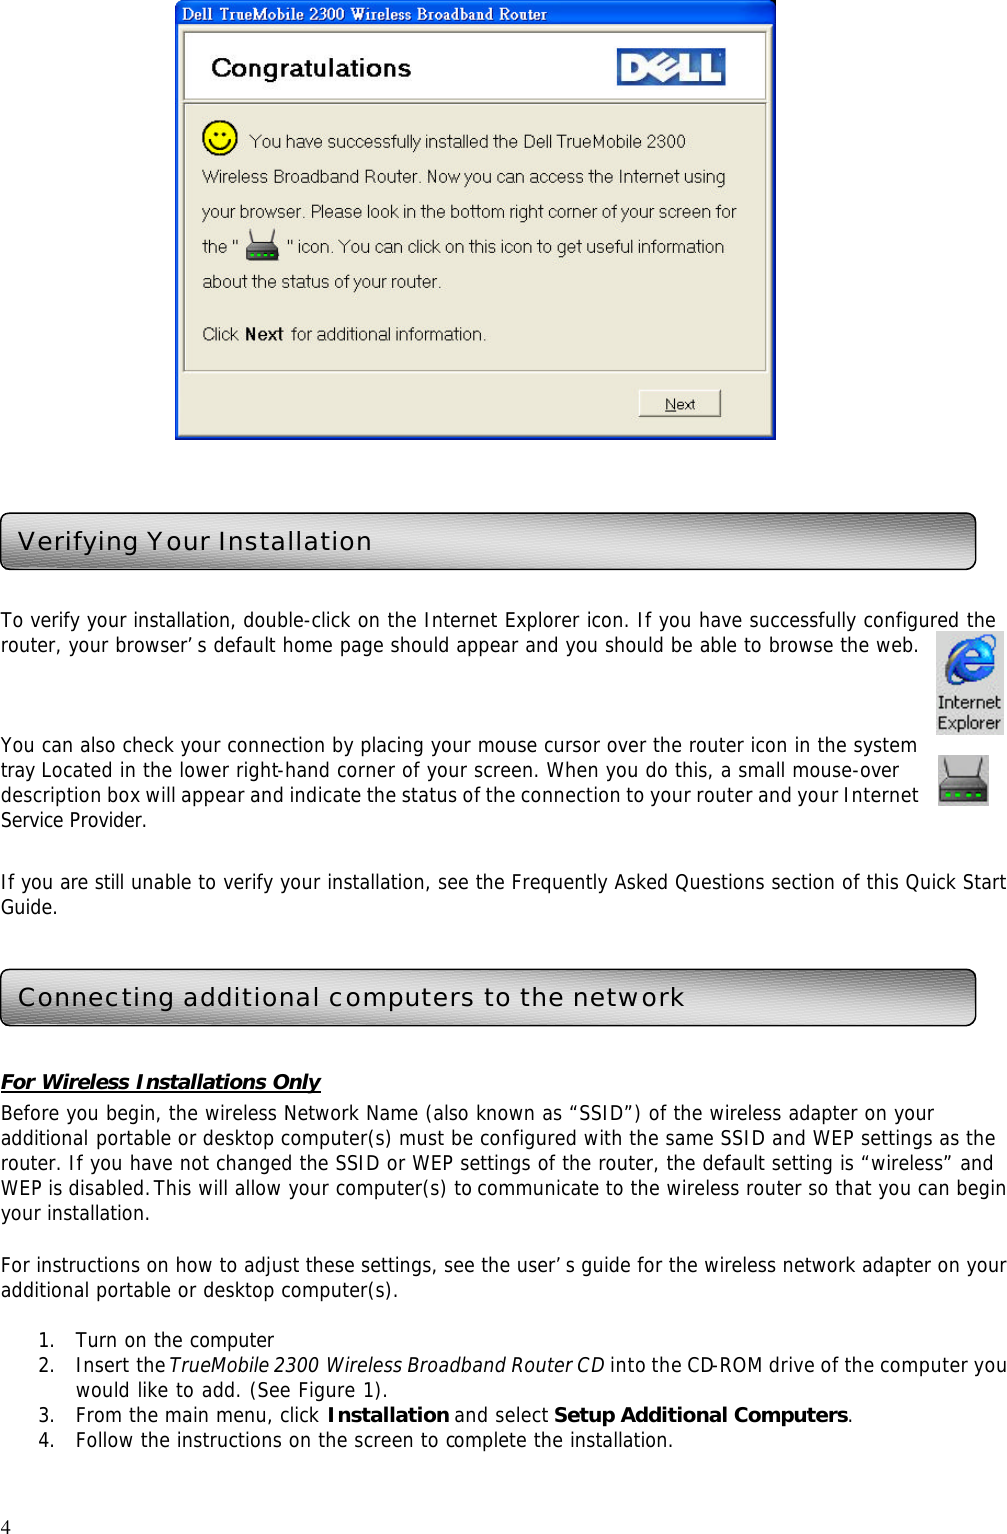 4      To verify your installation, double-click on the Internet Explorer icon. If you have successfully configured the router, your browser’s default home page should appear and you should be able to browse the web.   You can also check your connection by placing your mouse cursor over the router icon in the system tray Located in the lower right-hand corner of your screen. When you do this, a small mouse-over description box will appear and indicate the status of the connection to your router and your Internet Service Provider.  If you are still unable to verify your installation, see the Frequently Asked Questions section of this Quick Start Guide.      For Wireless Installations Only Before you begin, the wireless Network Name (also known as “SSID”) of the wireless adapter on your additional portable or desktop computer(s) must be configured with the same SSID and WEP settings as the router. If you have not changed the SSID or WEP settings of the router, the default setting is “wireless” and WEP is disabled. This will allow your computer(s) to communicate to the wireless router so that you can begin your installation.    For instructions on how to adjust these settings, see the user’s guide for the wireless network adapter on your additional portable or desktop computer(s).  1. Turn on the computer 2. Insert the TrueMobile 2300 Wireless Broadband Router CD into the CD-ROM drive of the computer you would like to add. (See Figure 1).   3. From the main menu, click Installation and select Setup Additional Computers. 4. Follow the instructions on the screen to complete the installation. Verifying Your Installation Connecting additional computers to the network 